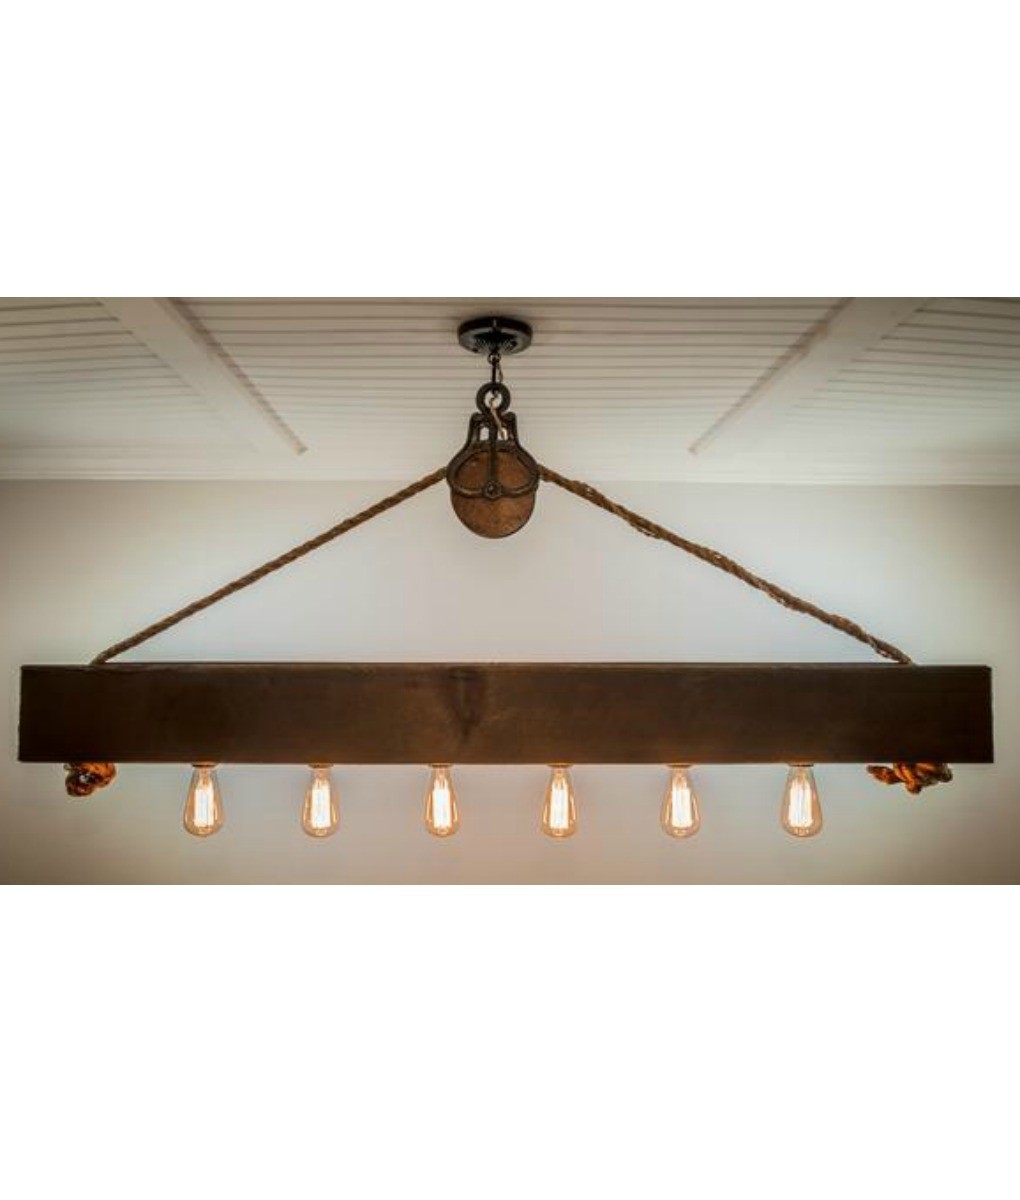 Rustic wood beam chandelier with edison bulbs rope and pulley